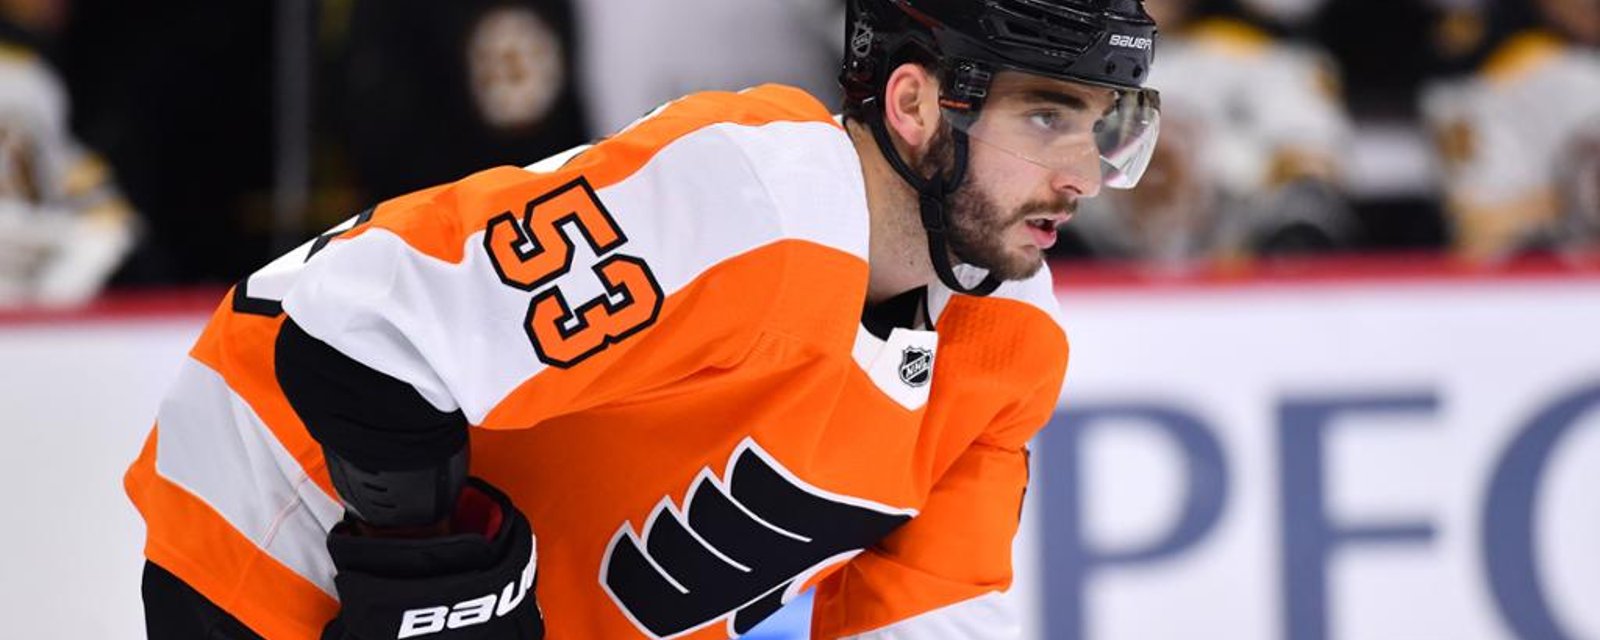 Shayne Gostibehere now knows his fate